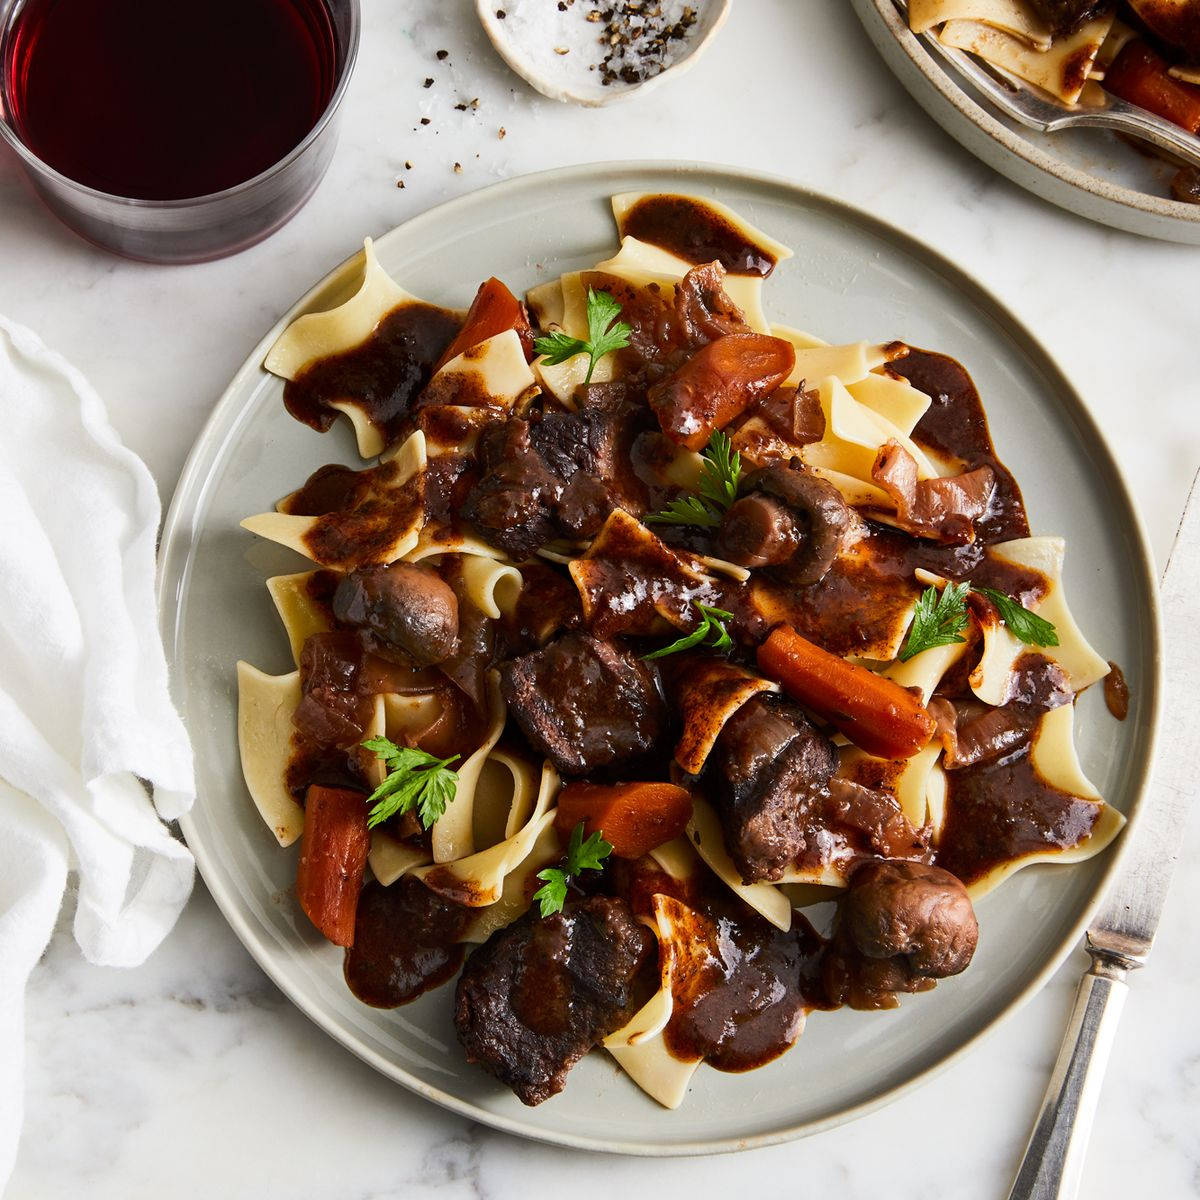 Cheesebeef Bourguignon Can Be Translated To 